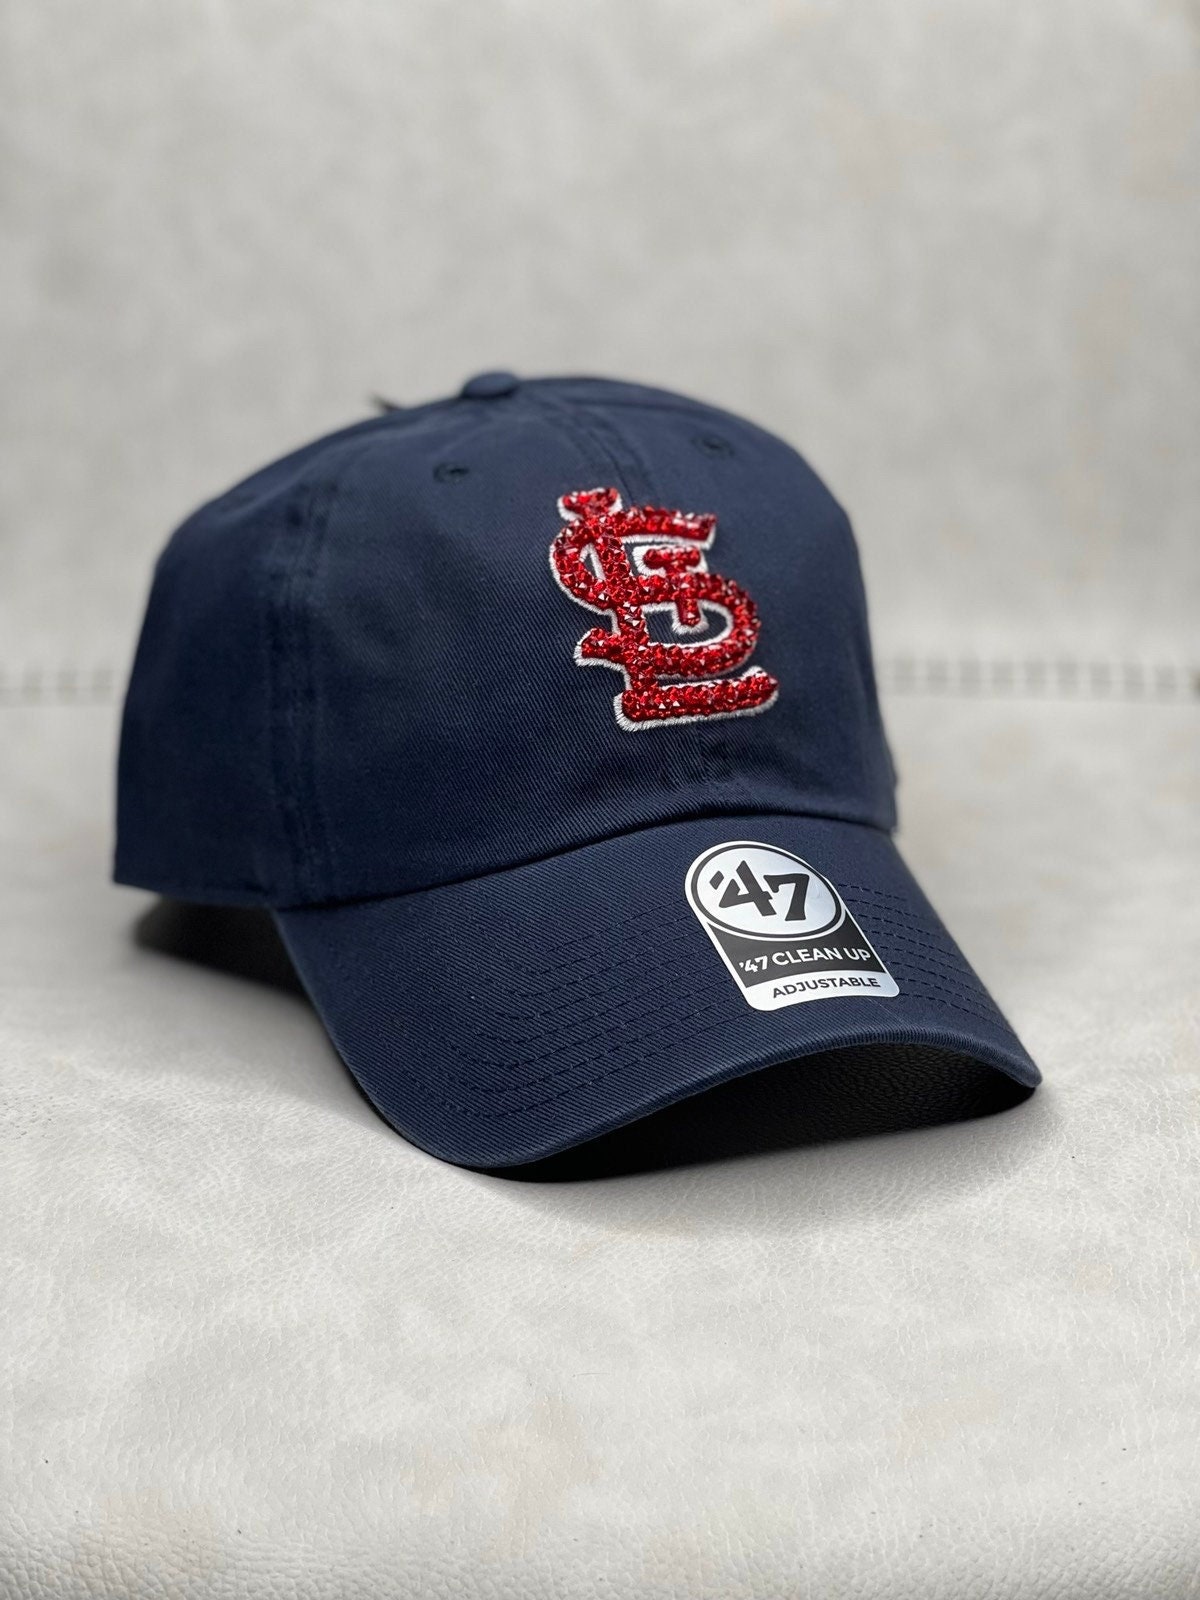 St. Louis Cardinals Camo Adjustable Clean Up Hat by '47 Brand